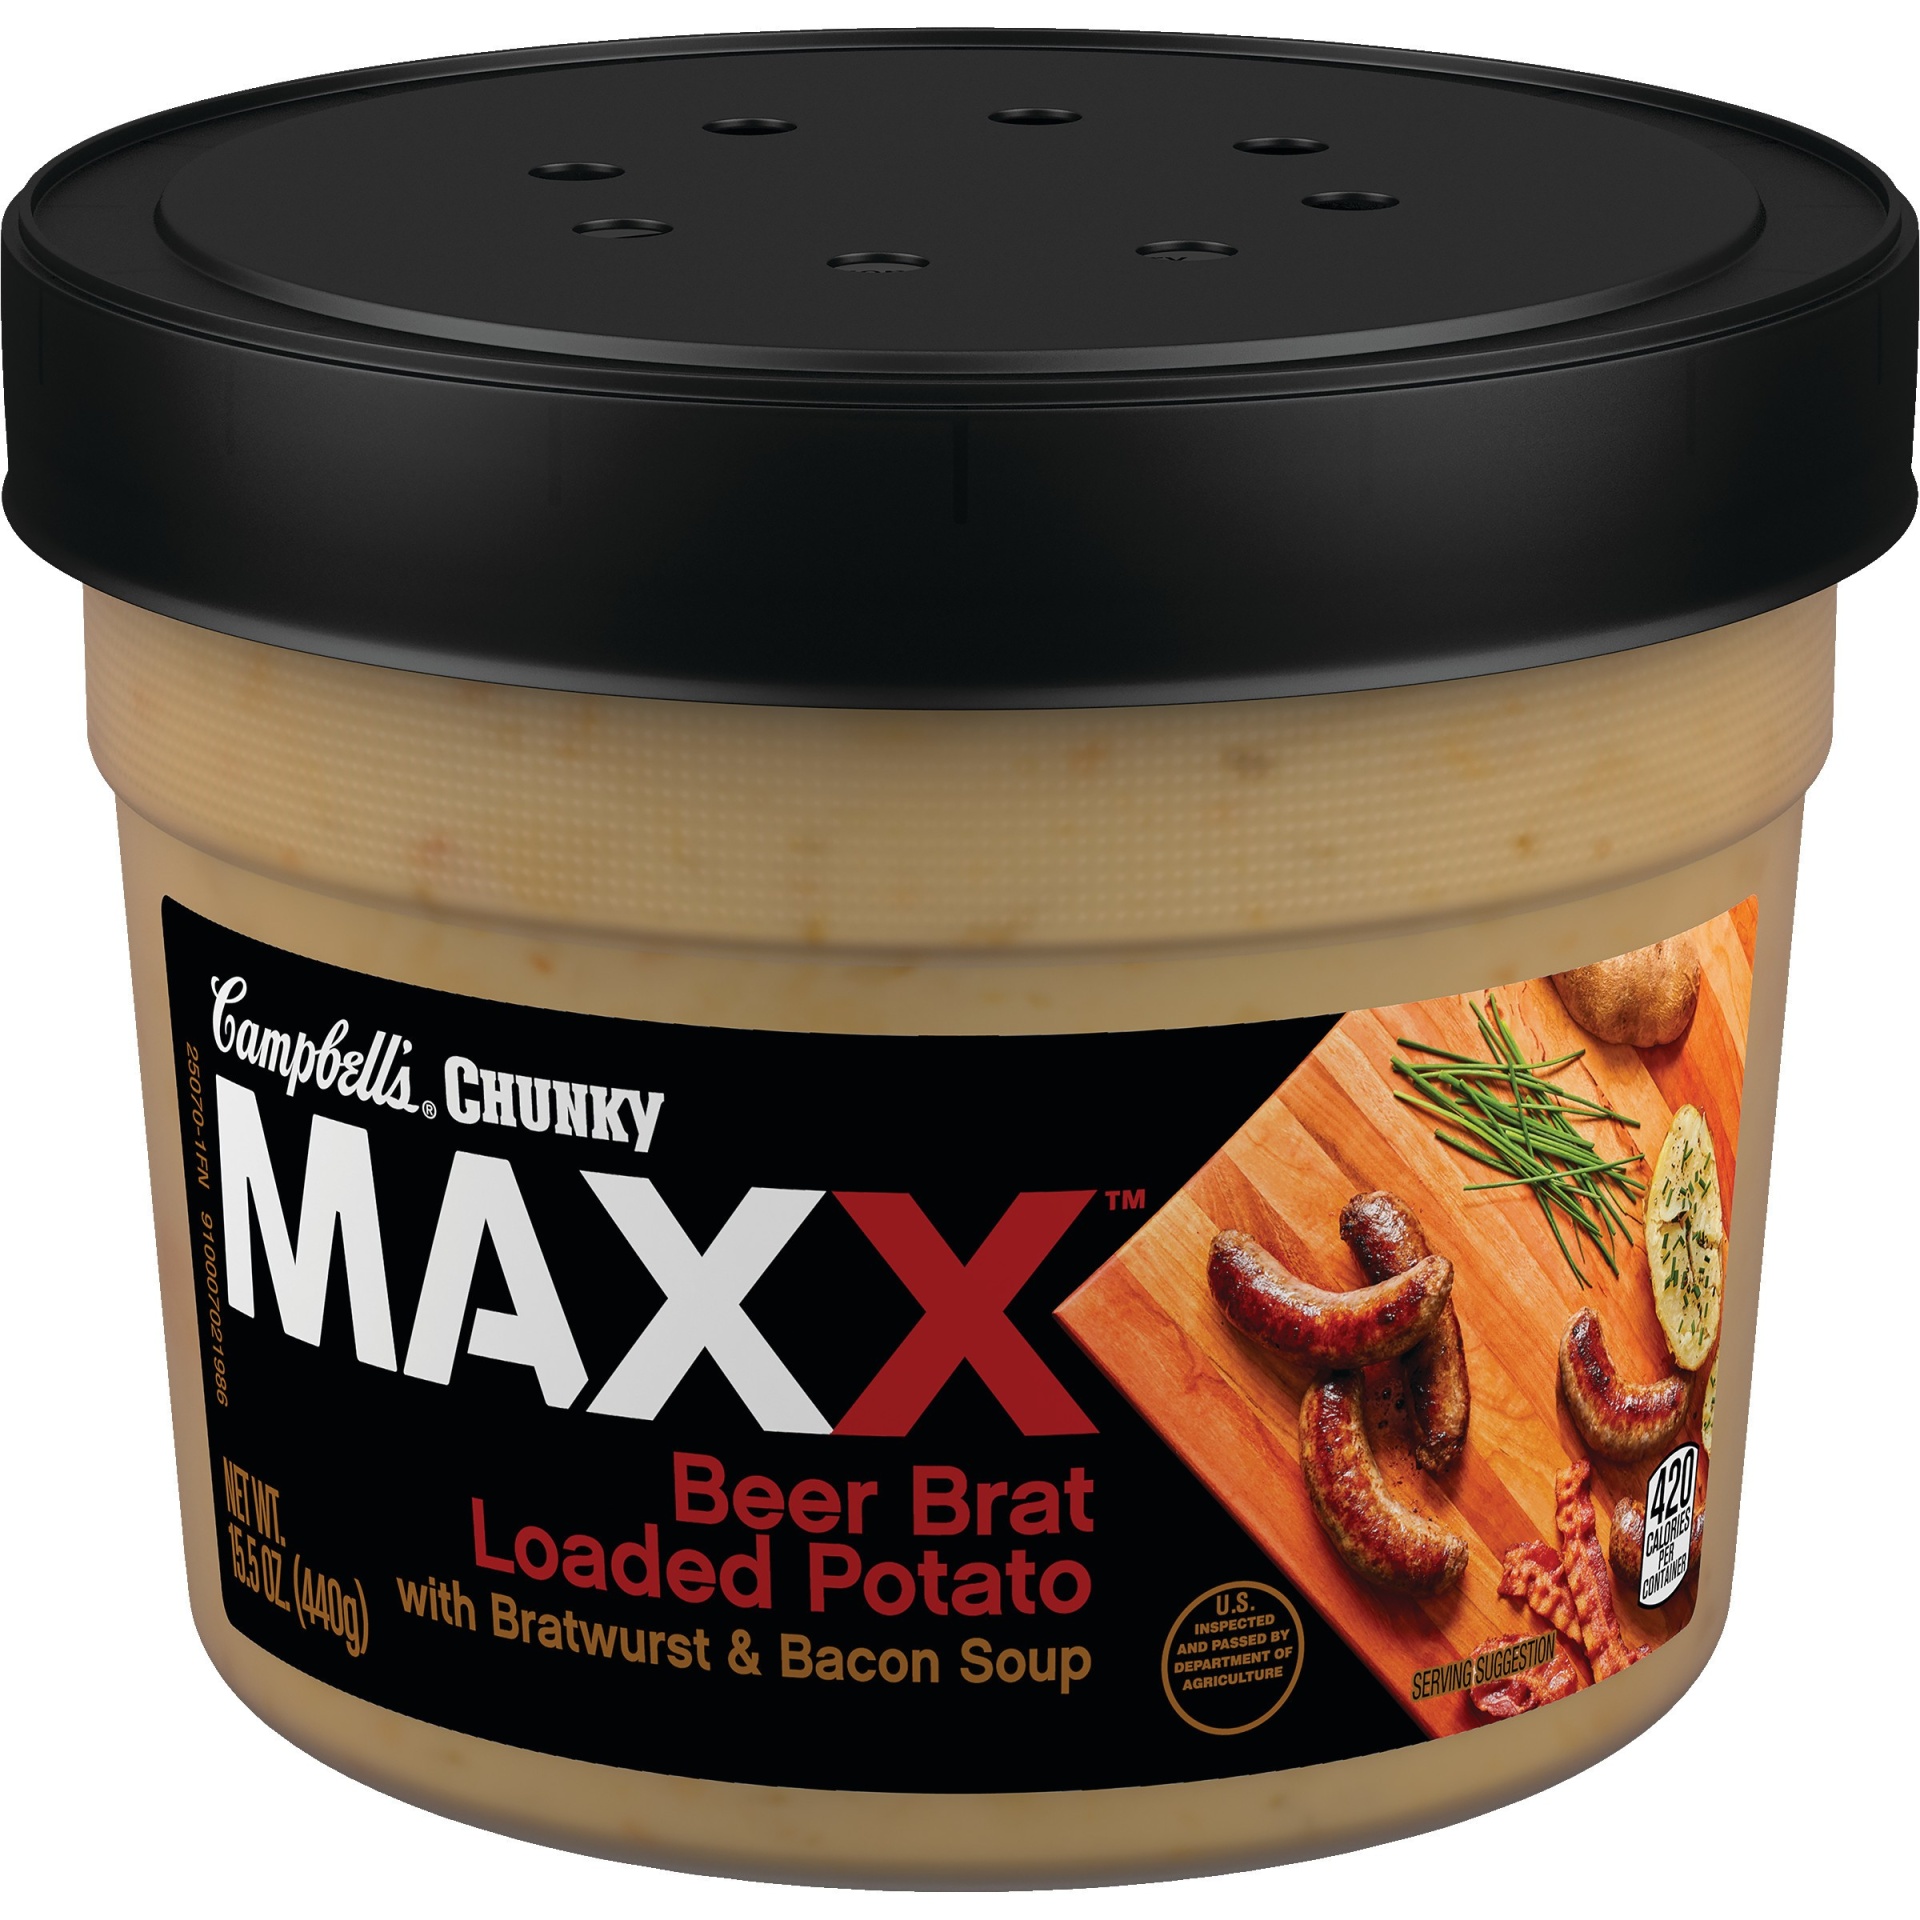 slide 1 of 1, Campbell's Chunky Maxx Beer Brat Loaded Potato Soup, 15.5 oz